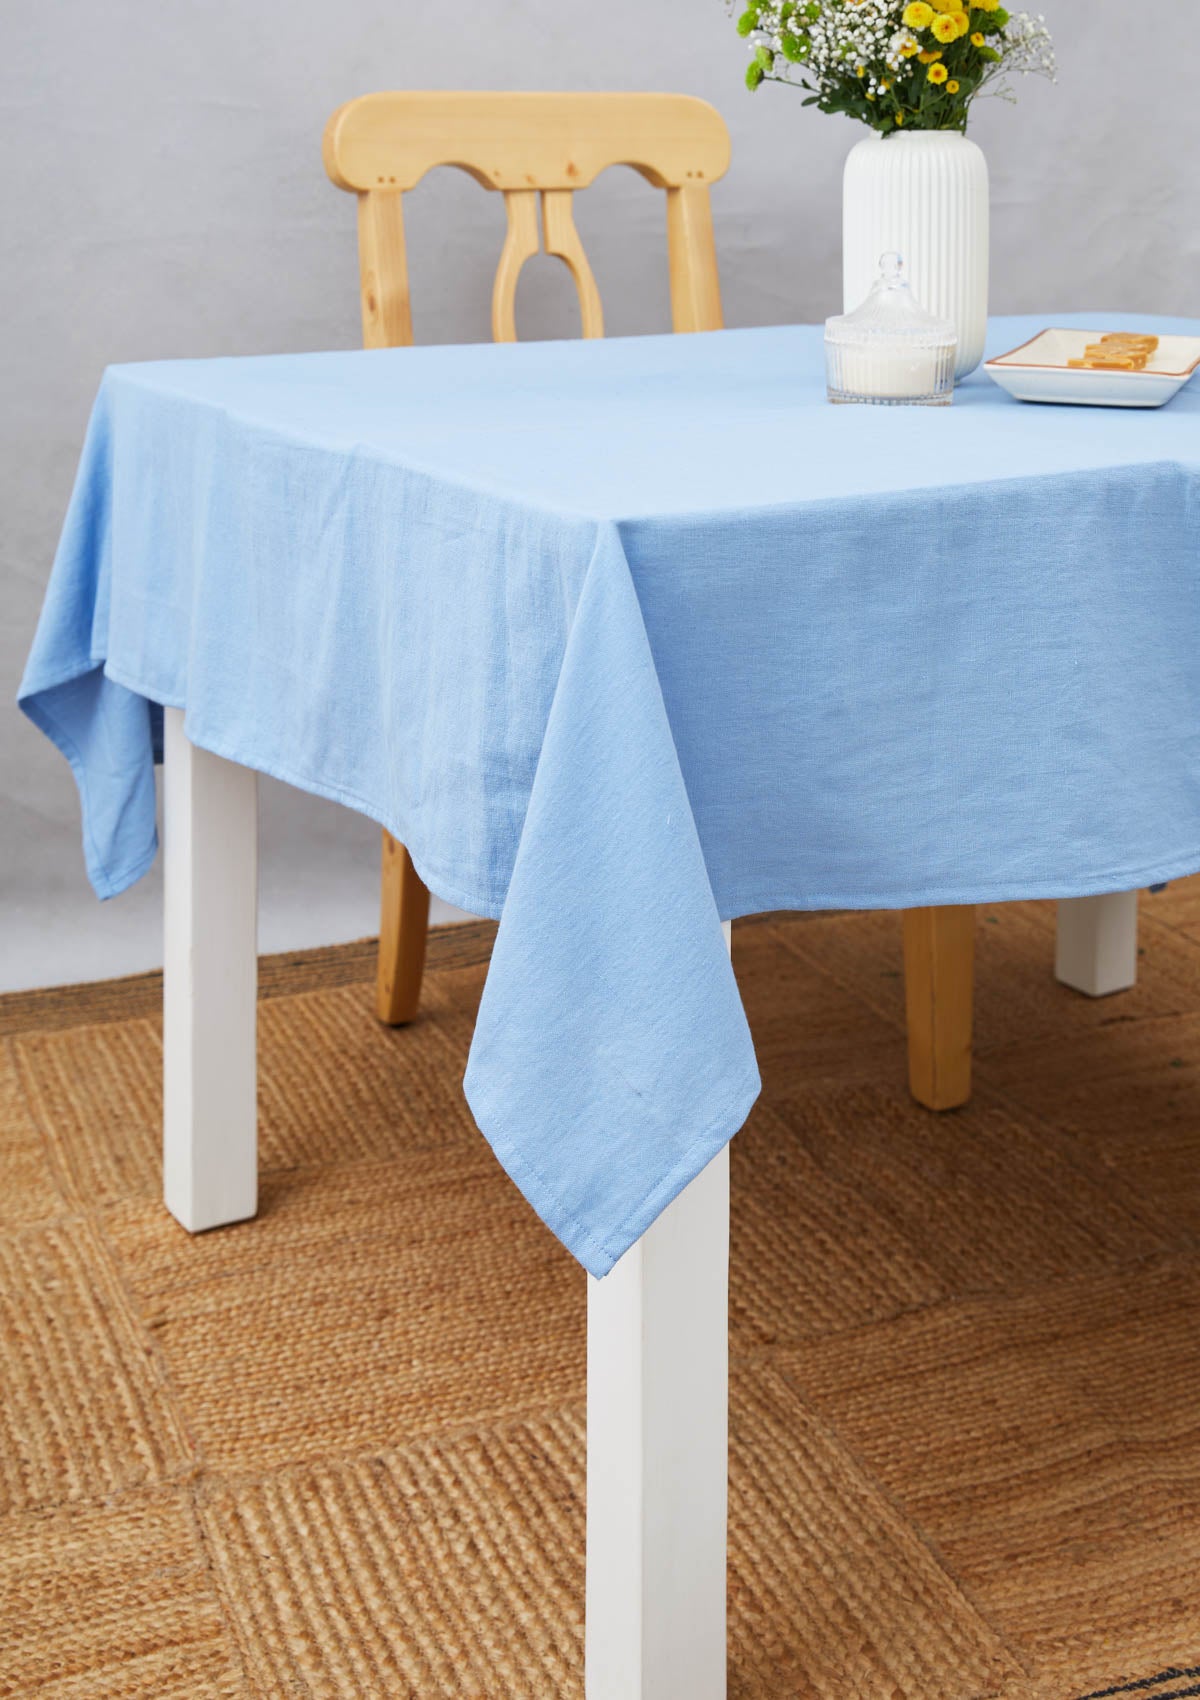 Dyed Linen Table Cloth - Powder Blue